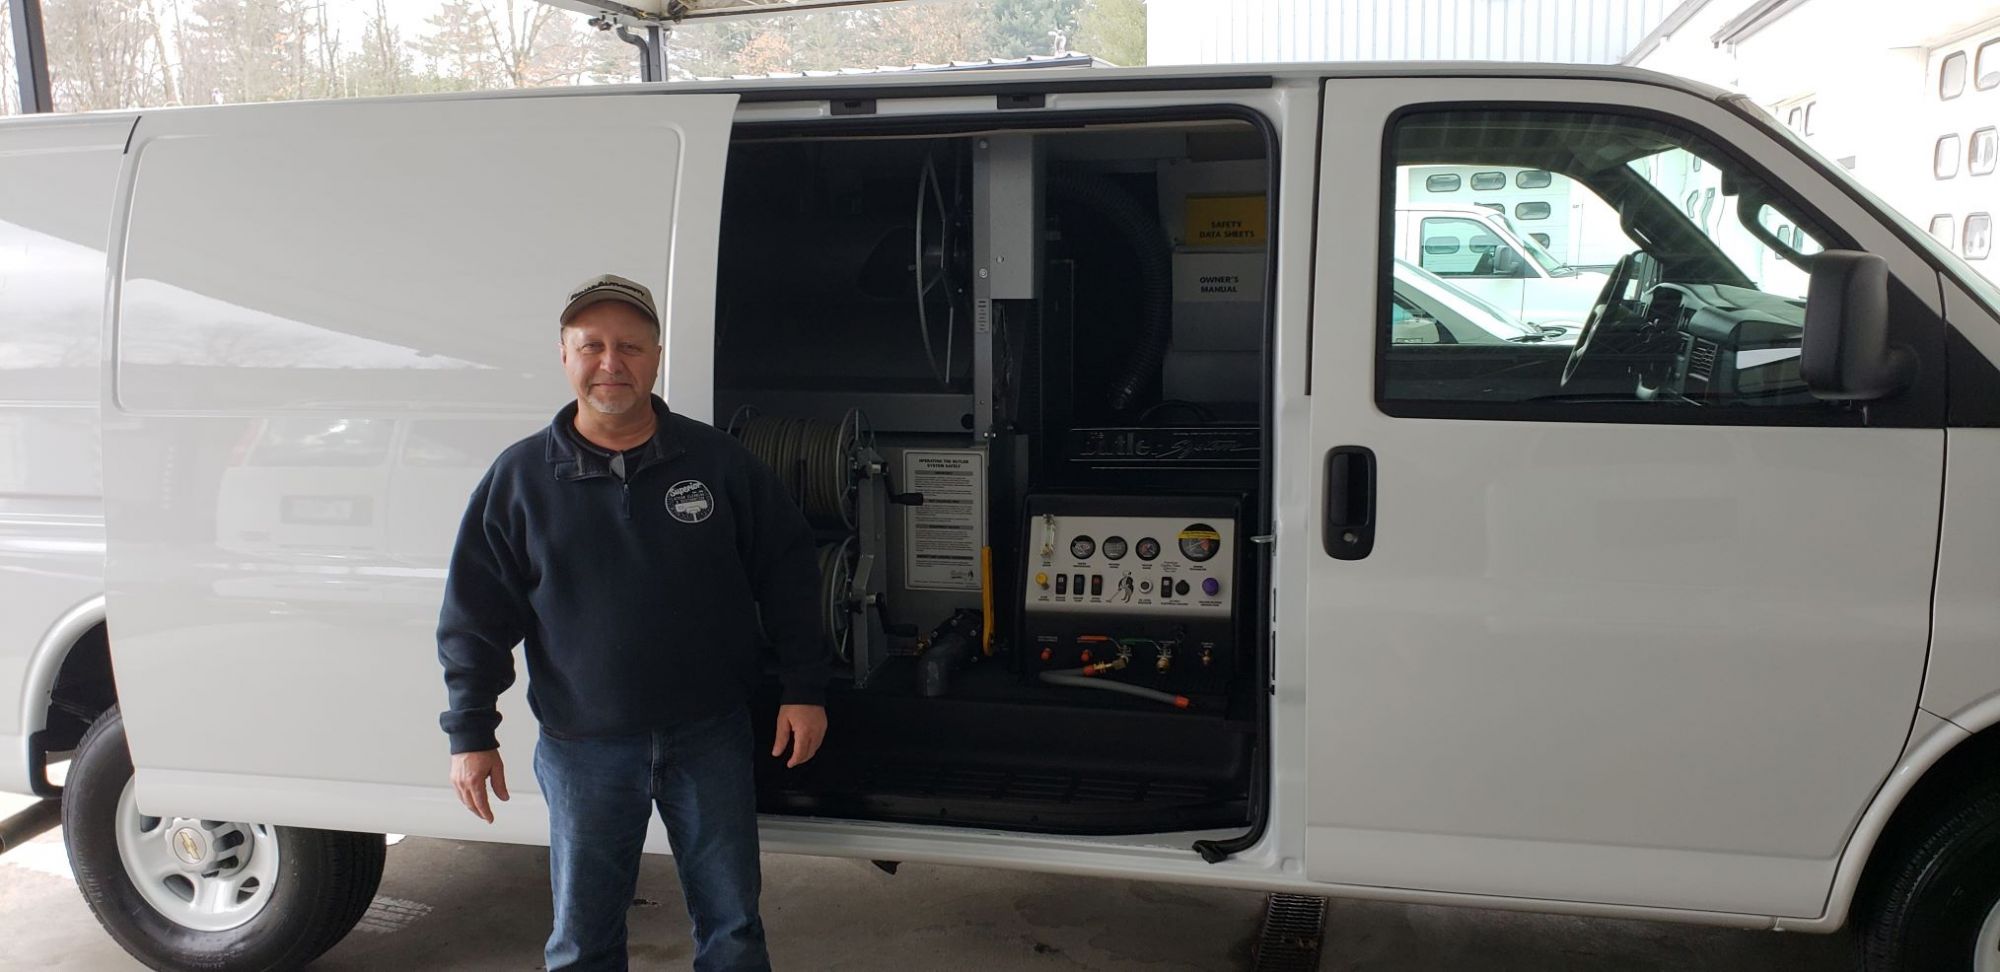 This was his first Butler System purchase, Perry has run several other brand name truckmounts in his business !